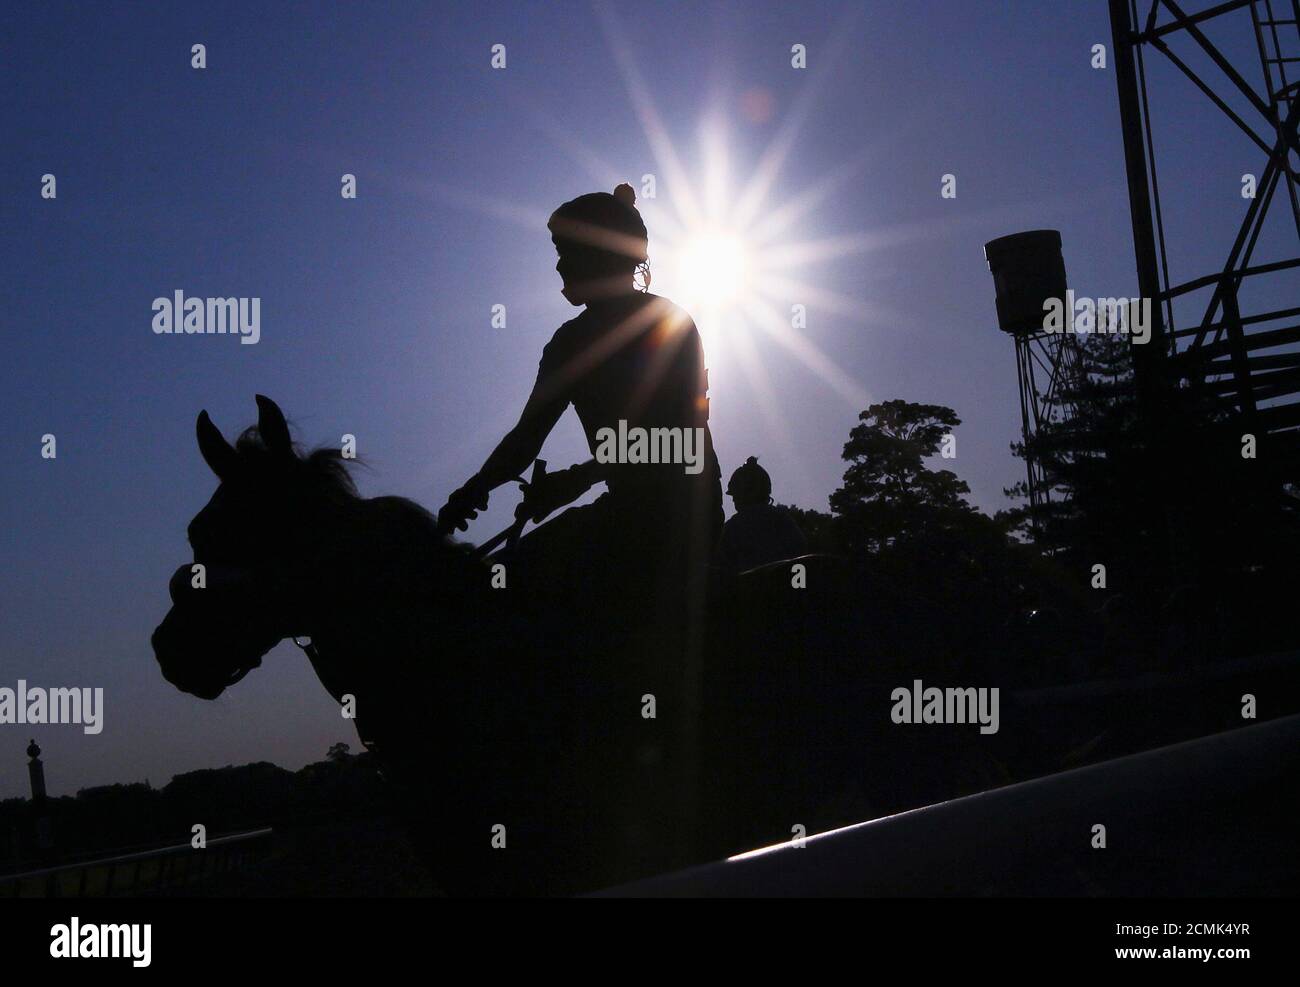 A horse and rider make their way to the track for early morning workout at Belmont Park in Elmont, New York, June 1, 2012.  REUTERS/Shannon Stapleton (UNITED STATES - Tags: SPORT HORSE RACING ANIMALS) Stock Photo